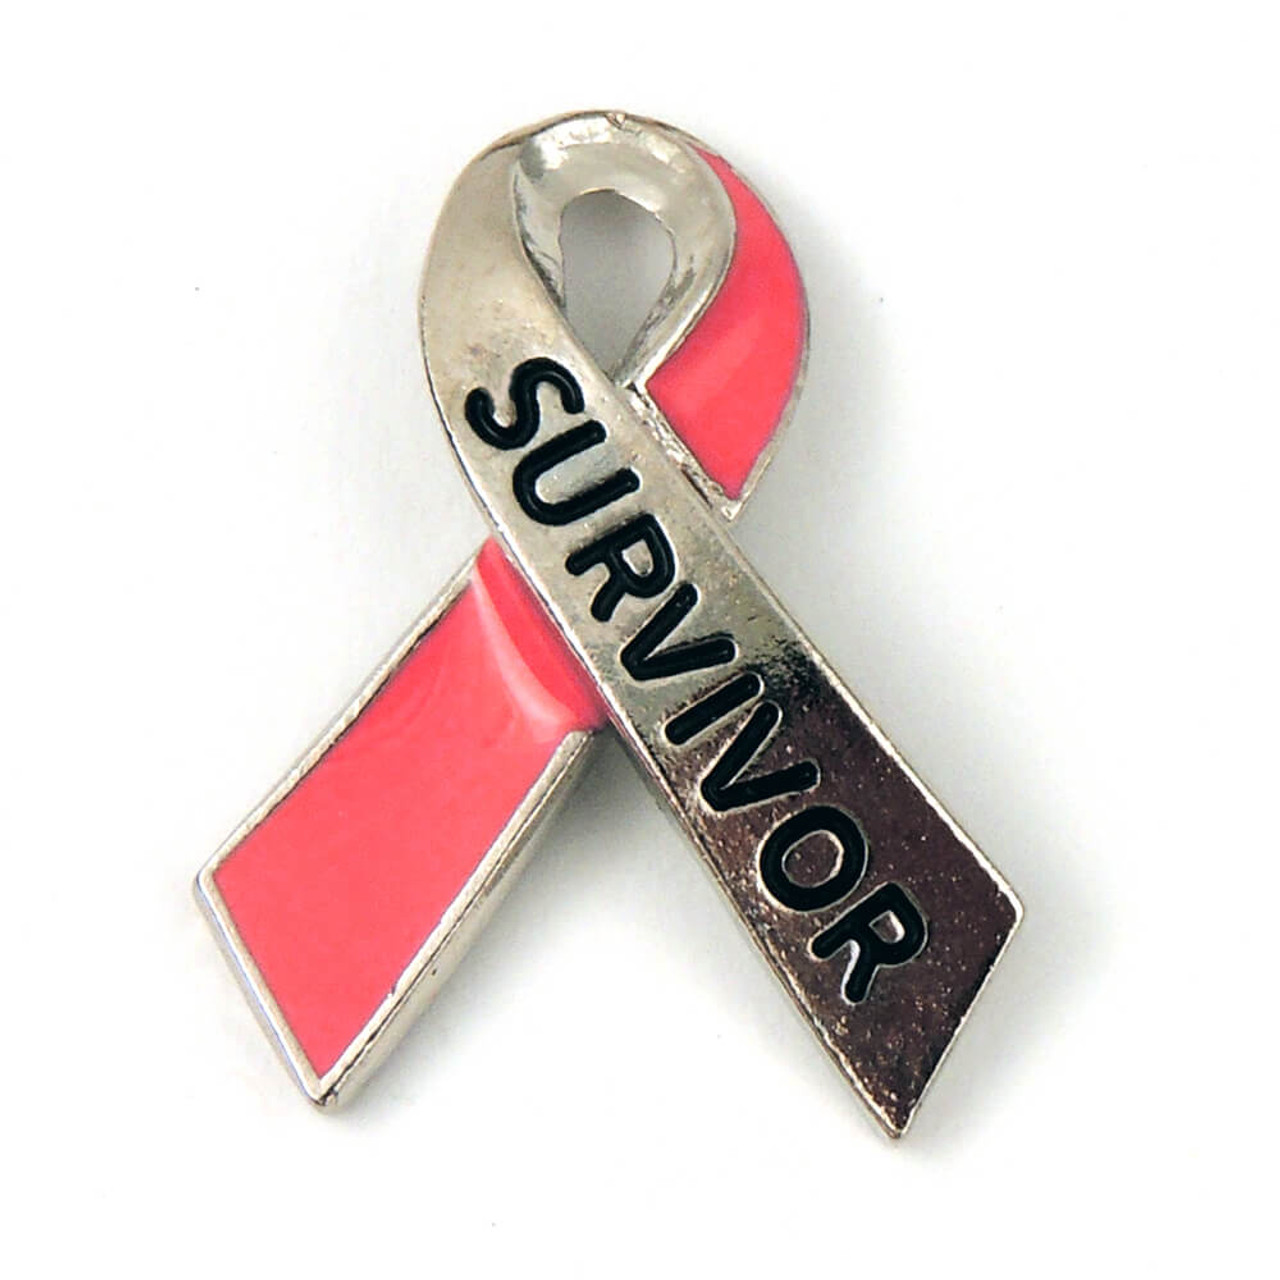 Safety pins, awareness ribbons, and the challenges of new symbols